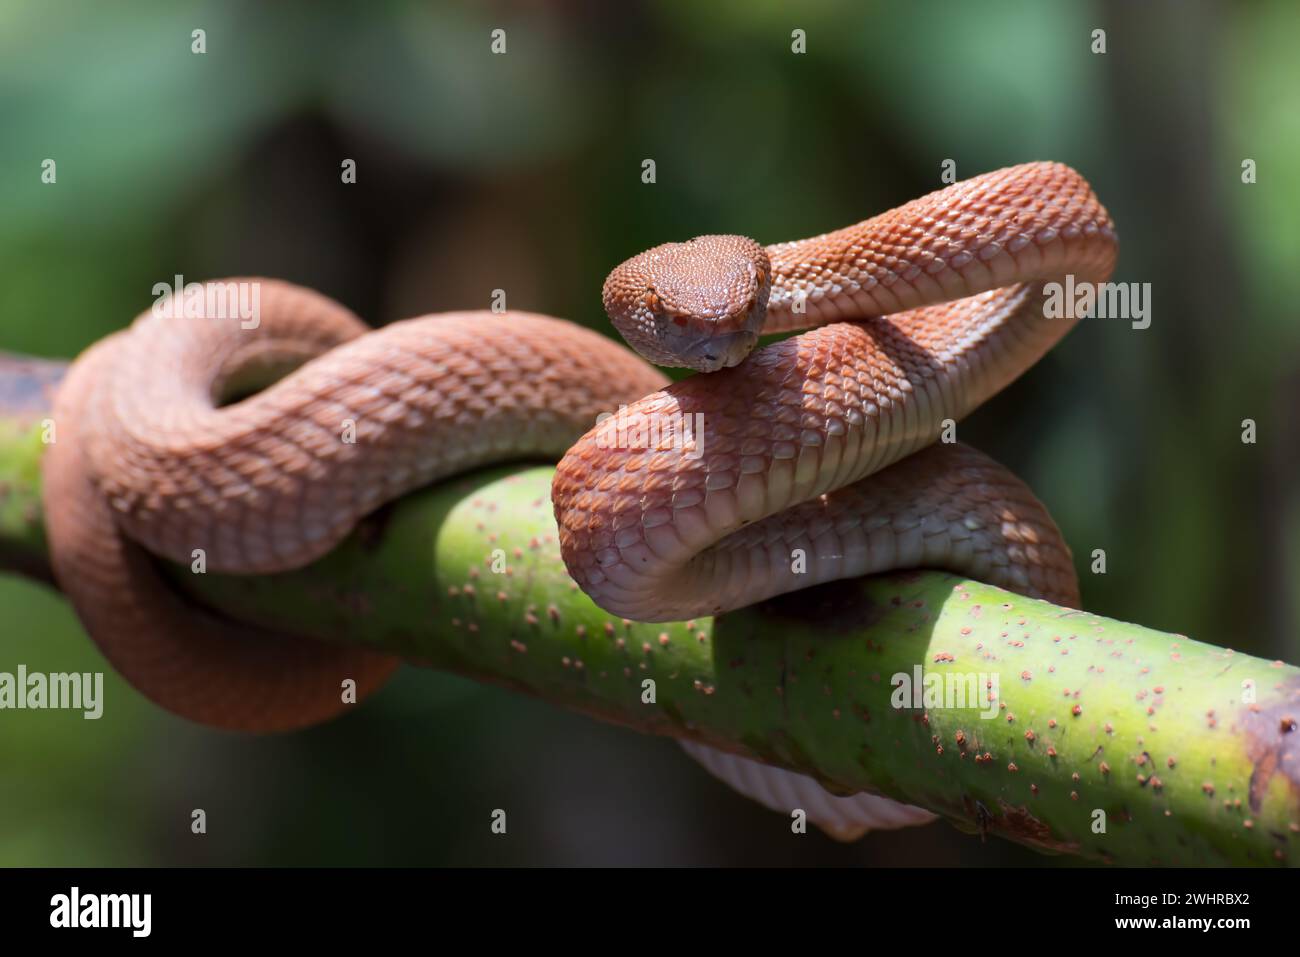 Mangrove pit viper coiled around a tree branch Stock Photo